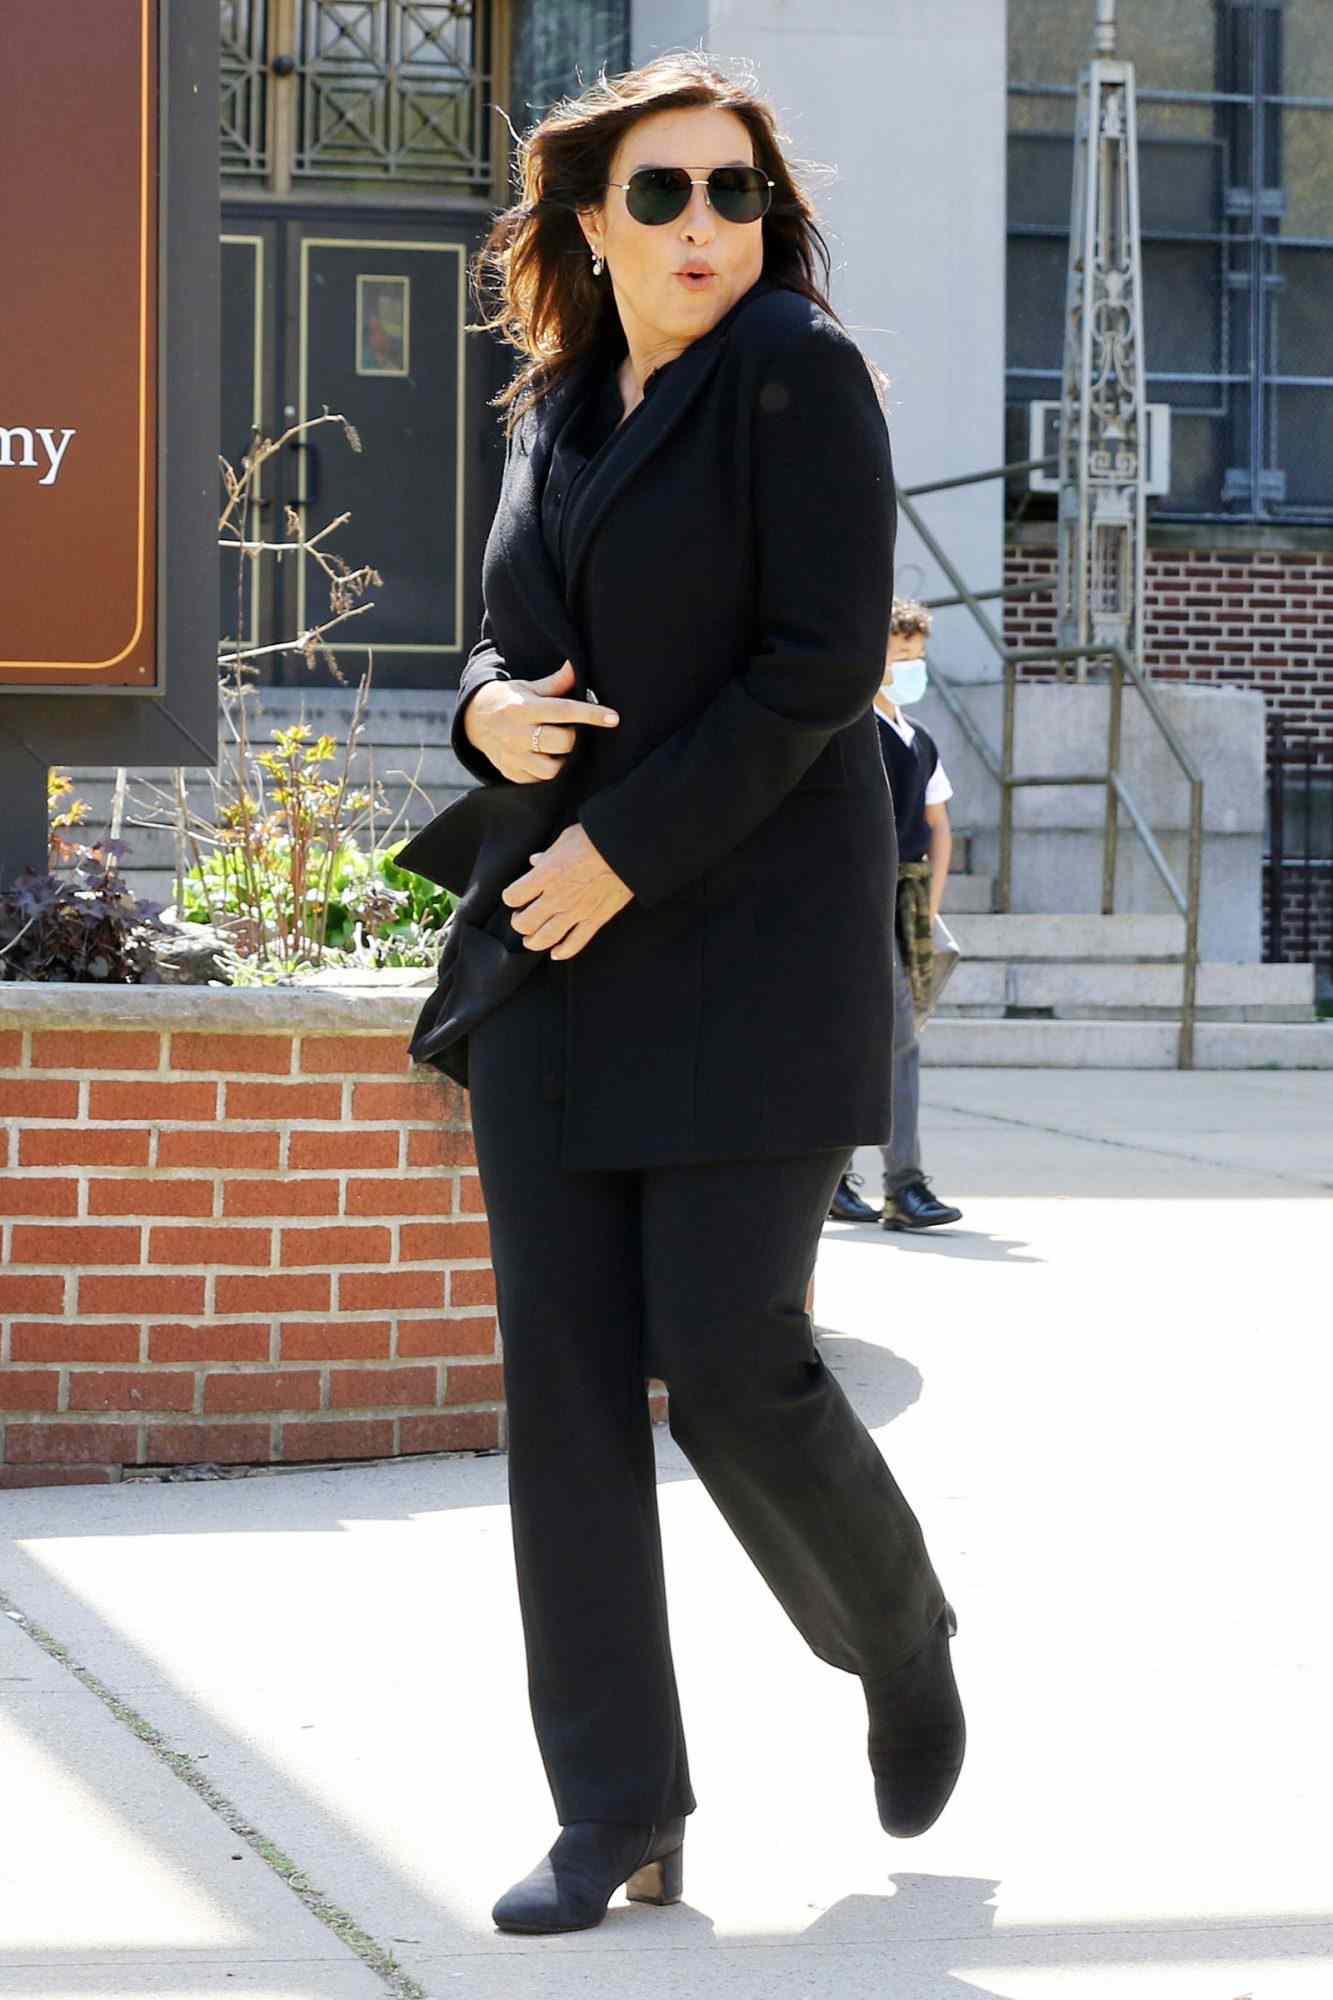 Mariska Hargitay is seen on the set of "Law and Order: Special Victims Unit" on April 20, 2021 in New York City